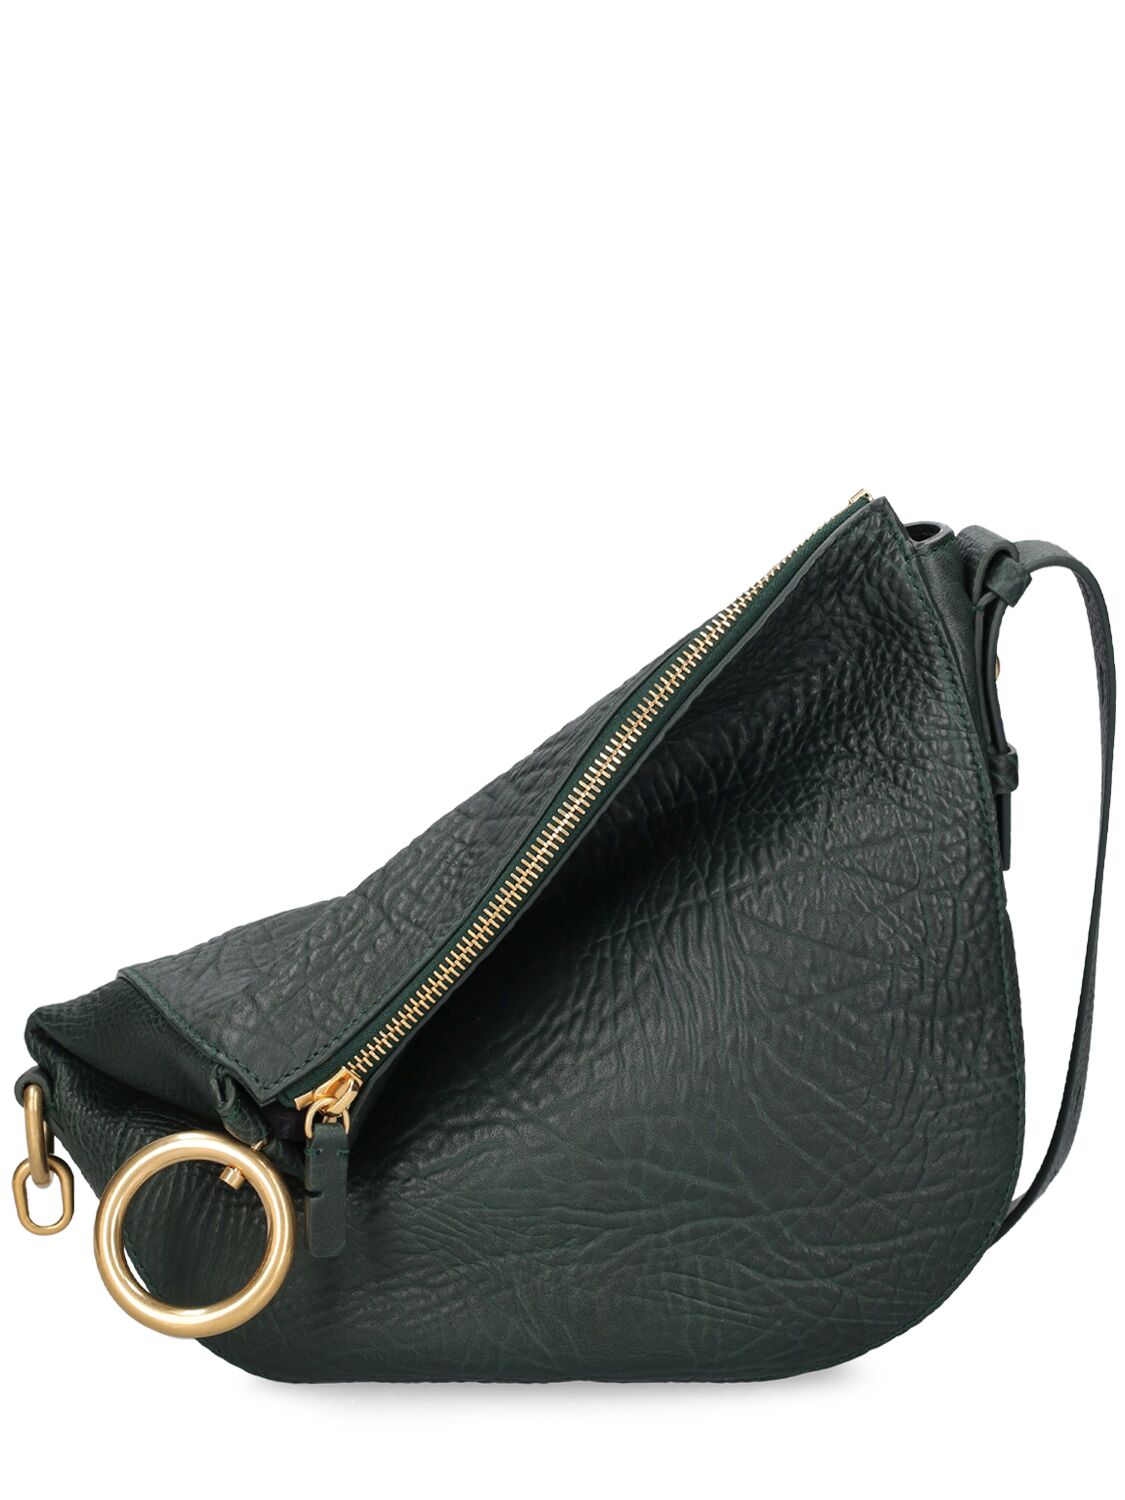 Image of Small Knight Leather Shoulder Bag